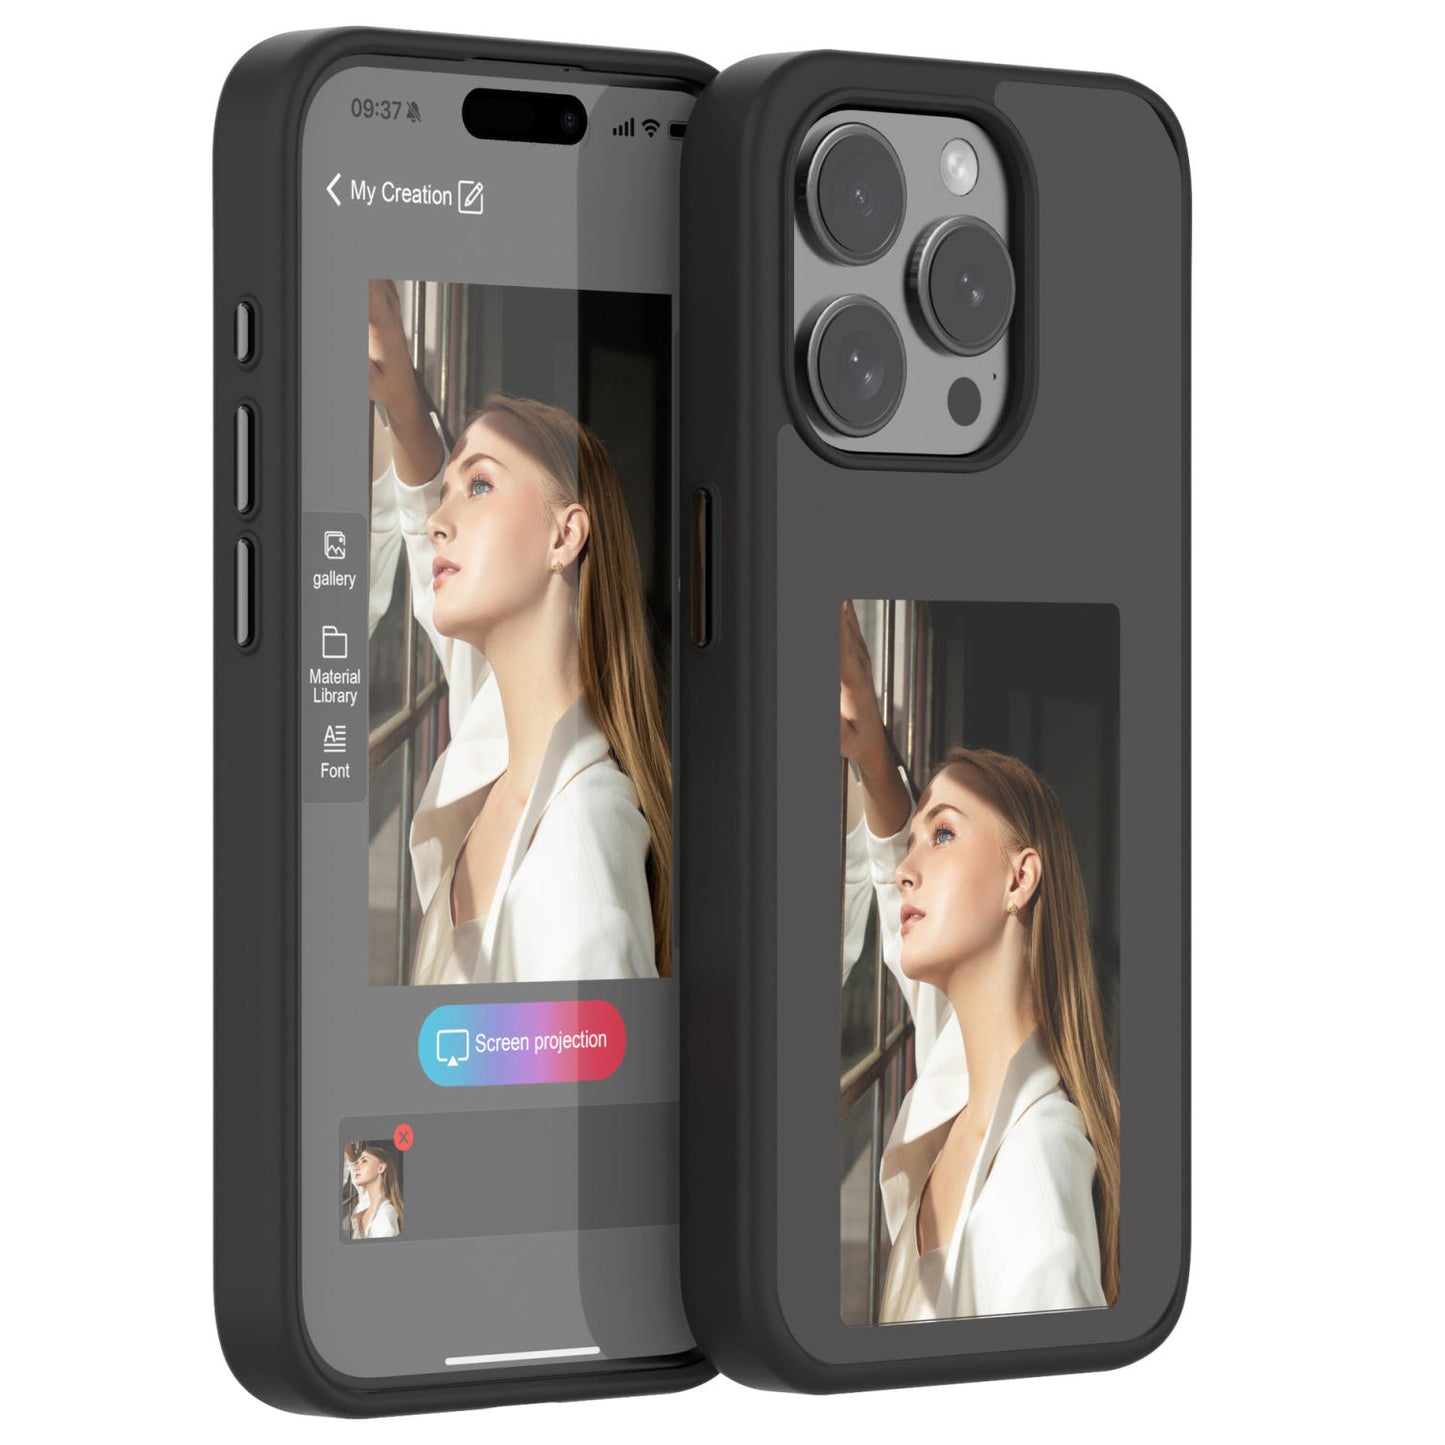 PhotoInk Case - The Original E-Ink Case for iPhone (3-ink)